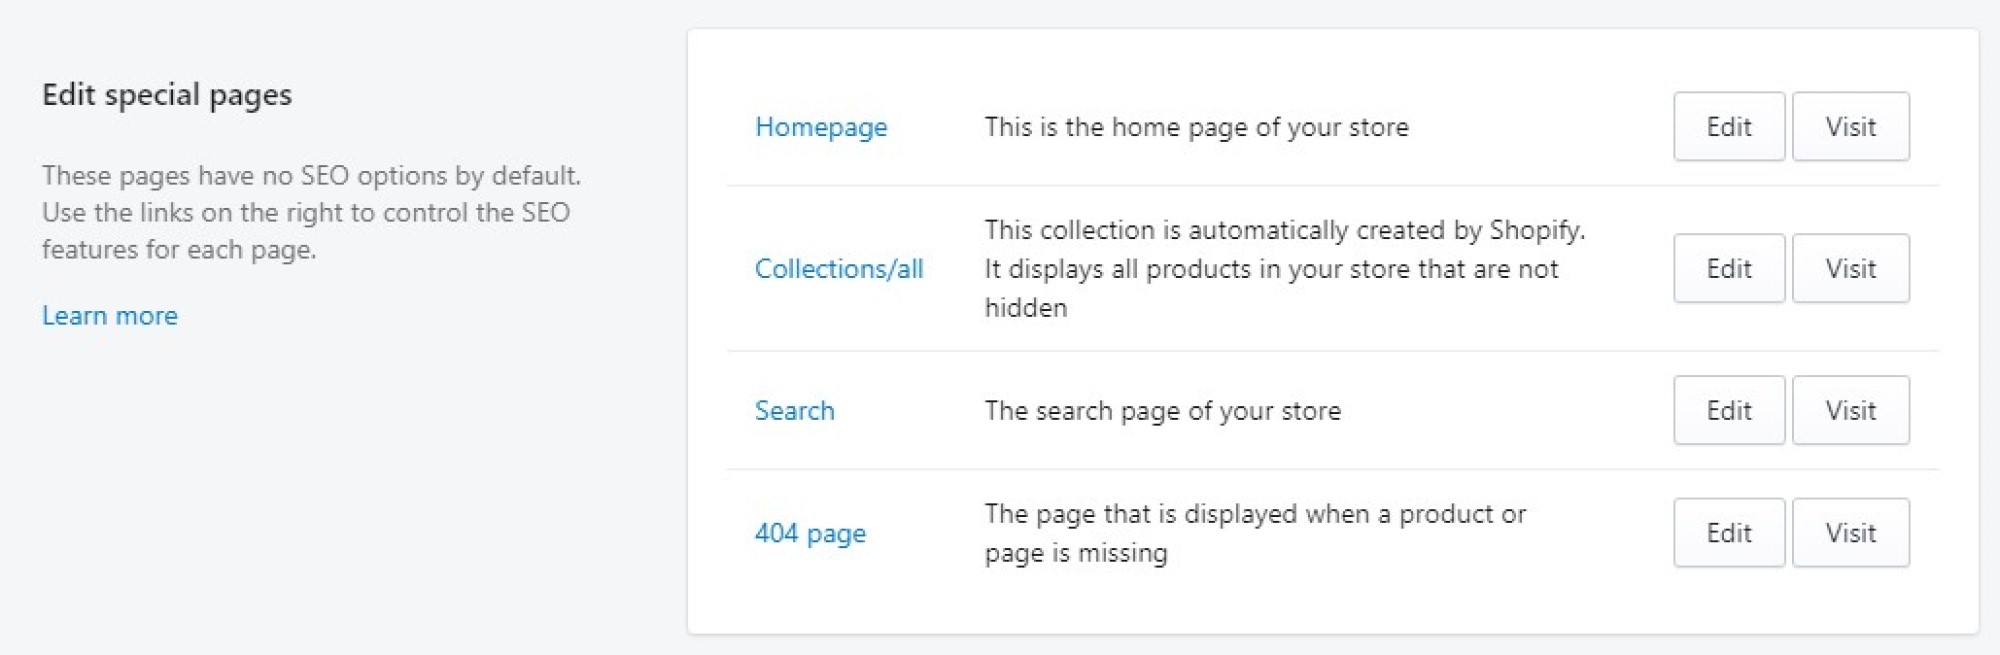 seo manager for shopify edit metadata on special pages screenshot